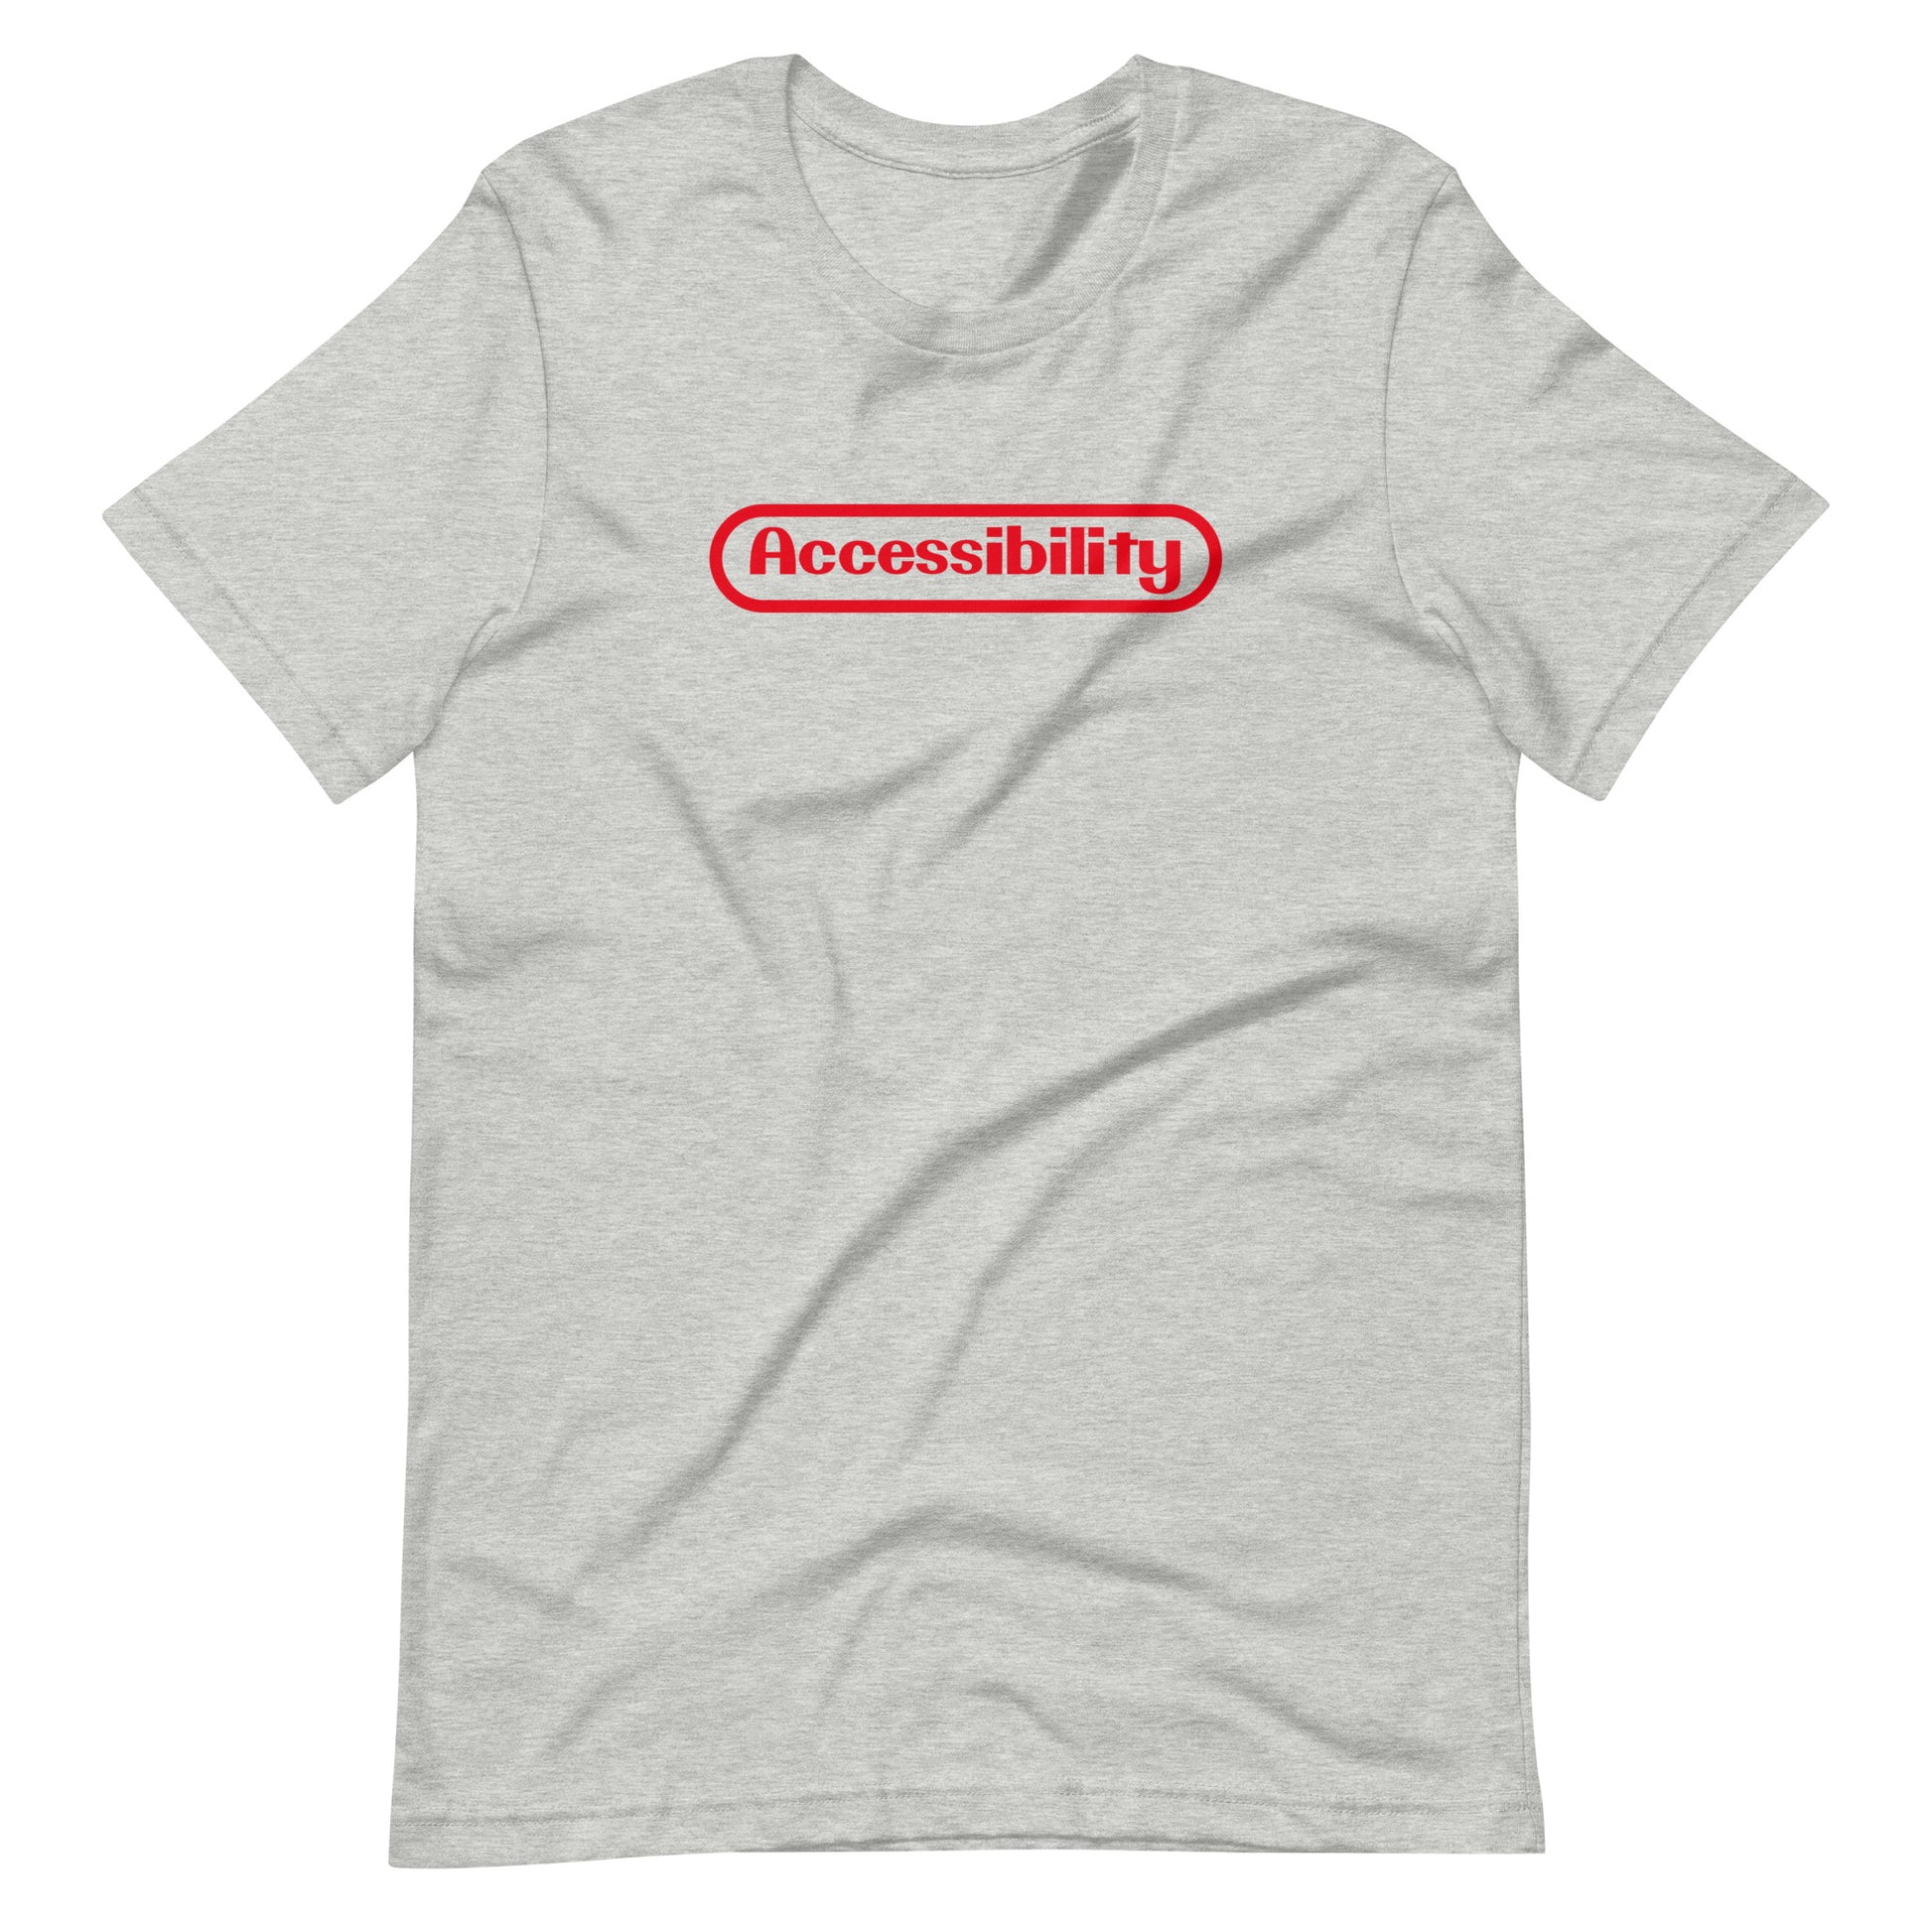 Red stylized Accessibility word with rounded border, prepresentative of the Nintent logo, center aligned, on front of heather grey t-shirt.